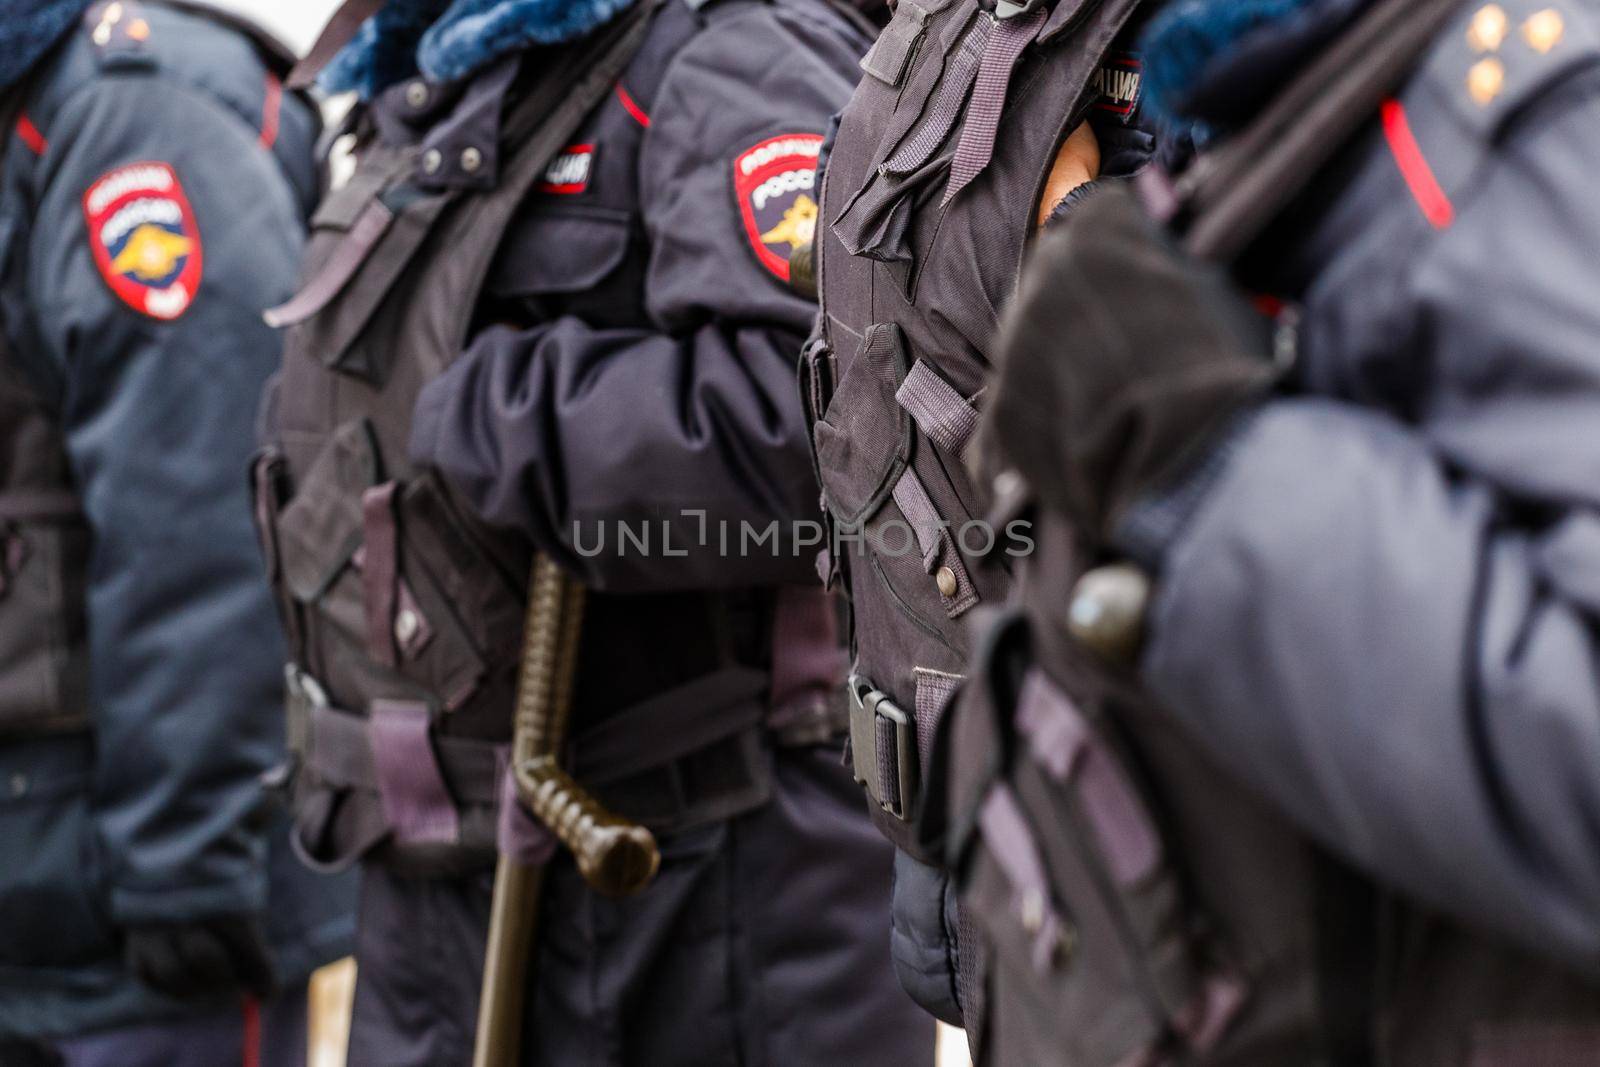 Tula, Russia - January 23, 2021: Police officers in black uniform with bulletproof vests - close-up view on black gloves with background blur.